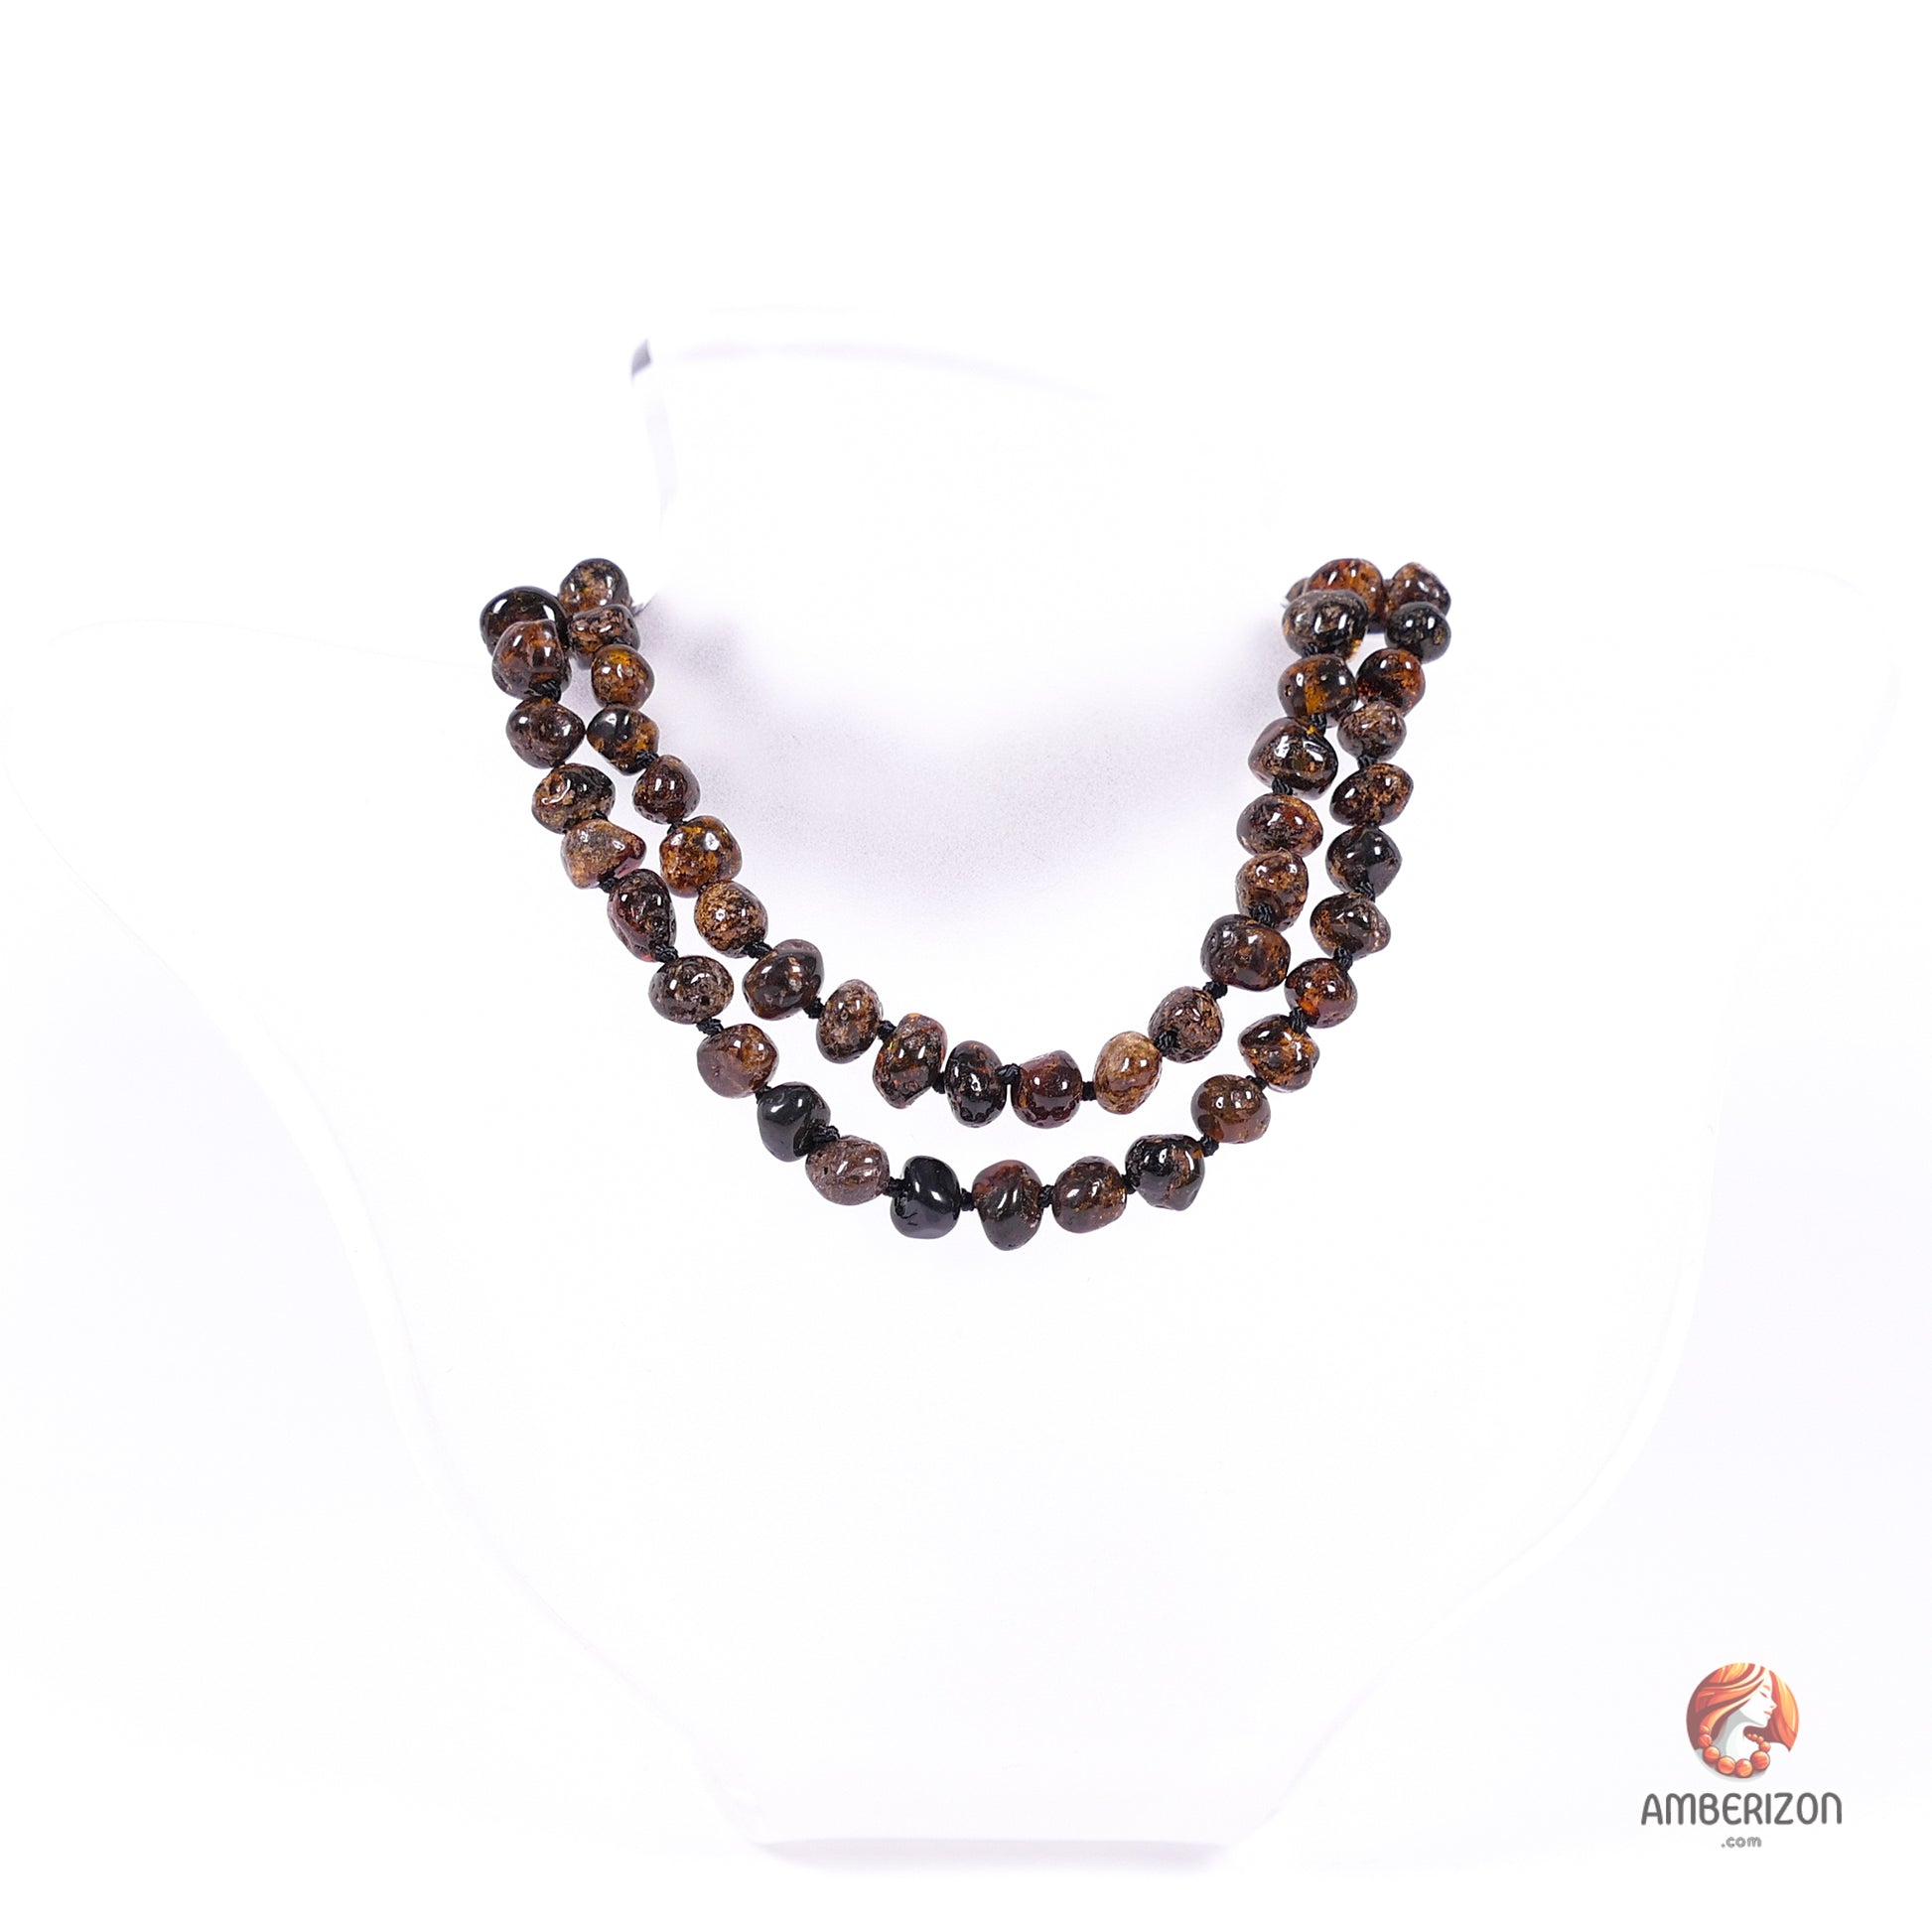 Authentic Unisex Baltic Amber Necklace - Gray Baroque Beads - Certified